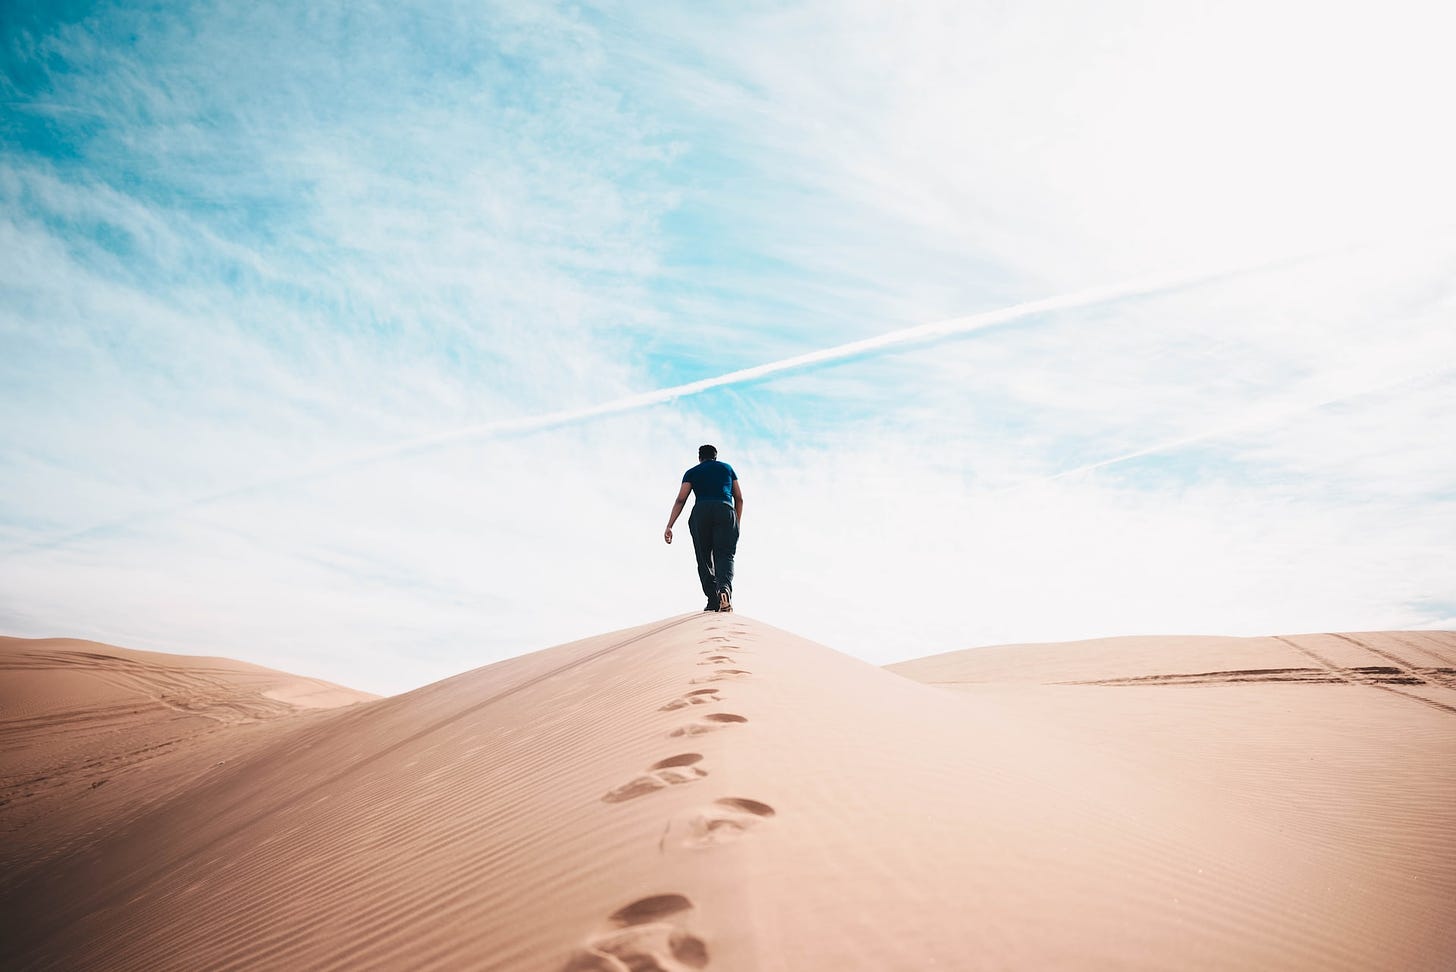 A person walks up a hill in a desert leaving footprints behind with each step.